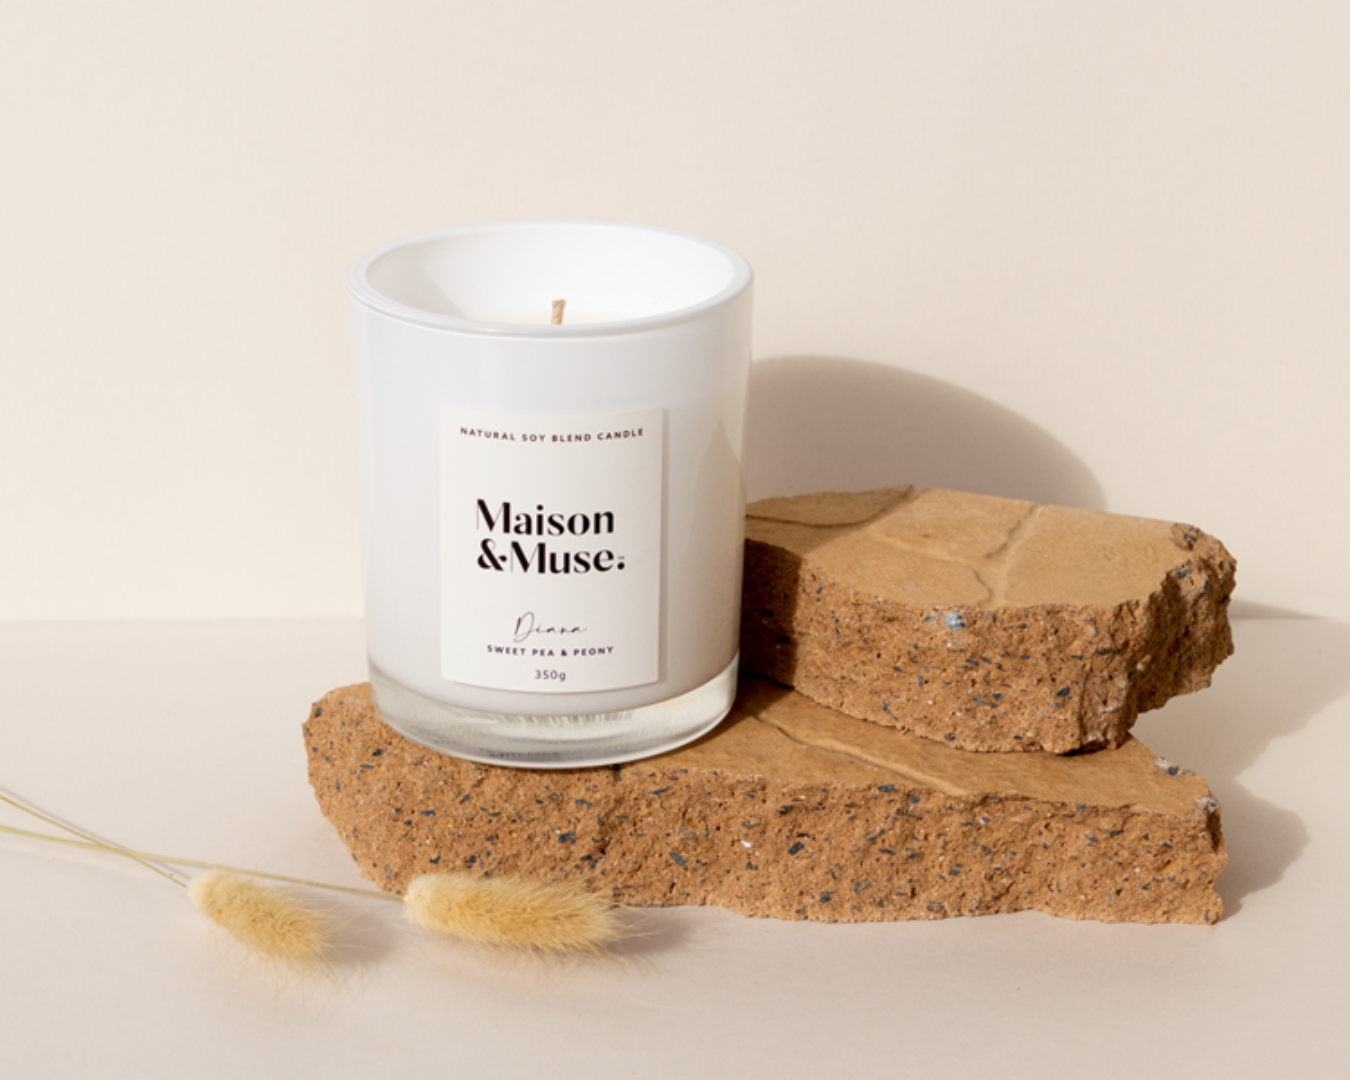 A Maison & Muse candle in scent 'Diana' is displayed looking sleek and luxurious